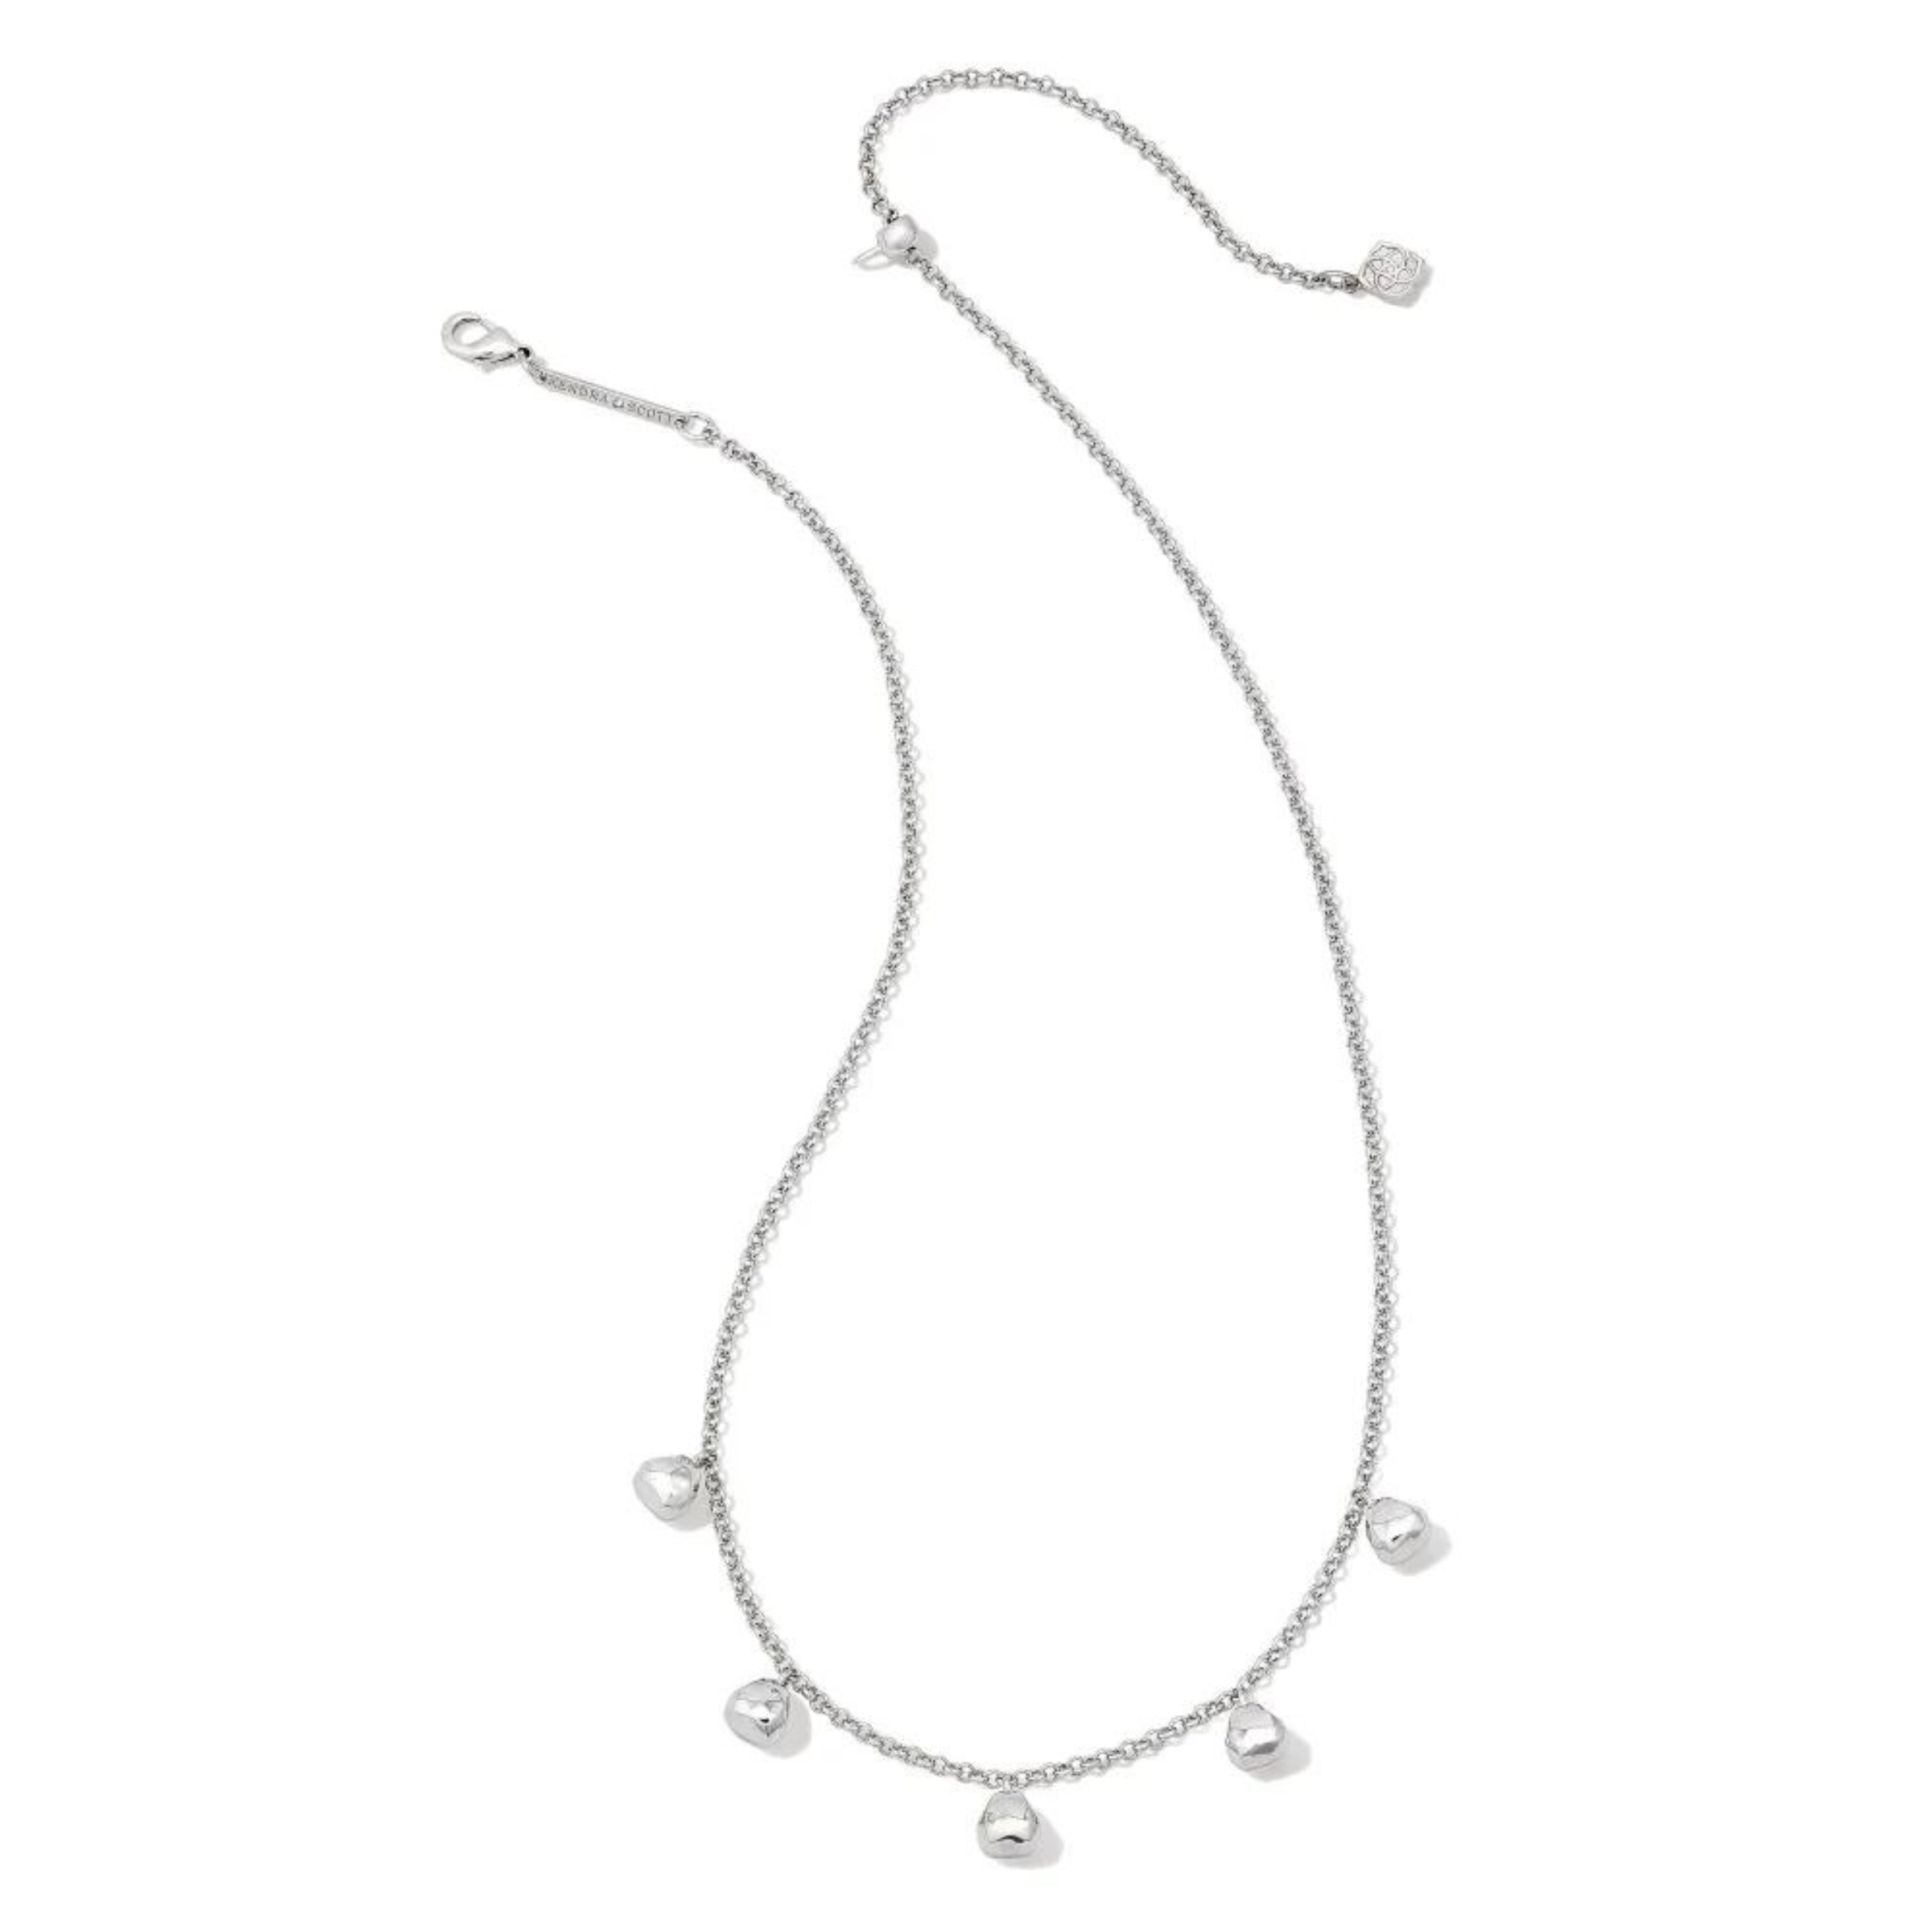 Silver chain necklace with five, silver bead charms hanging at the bottom of the necklace. This necklace is pictured on a white background. 